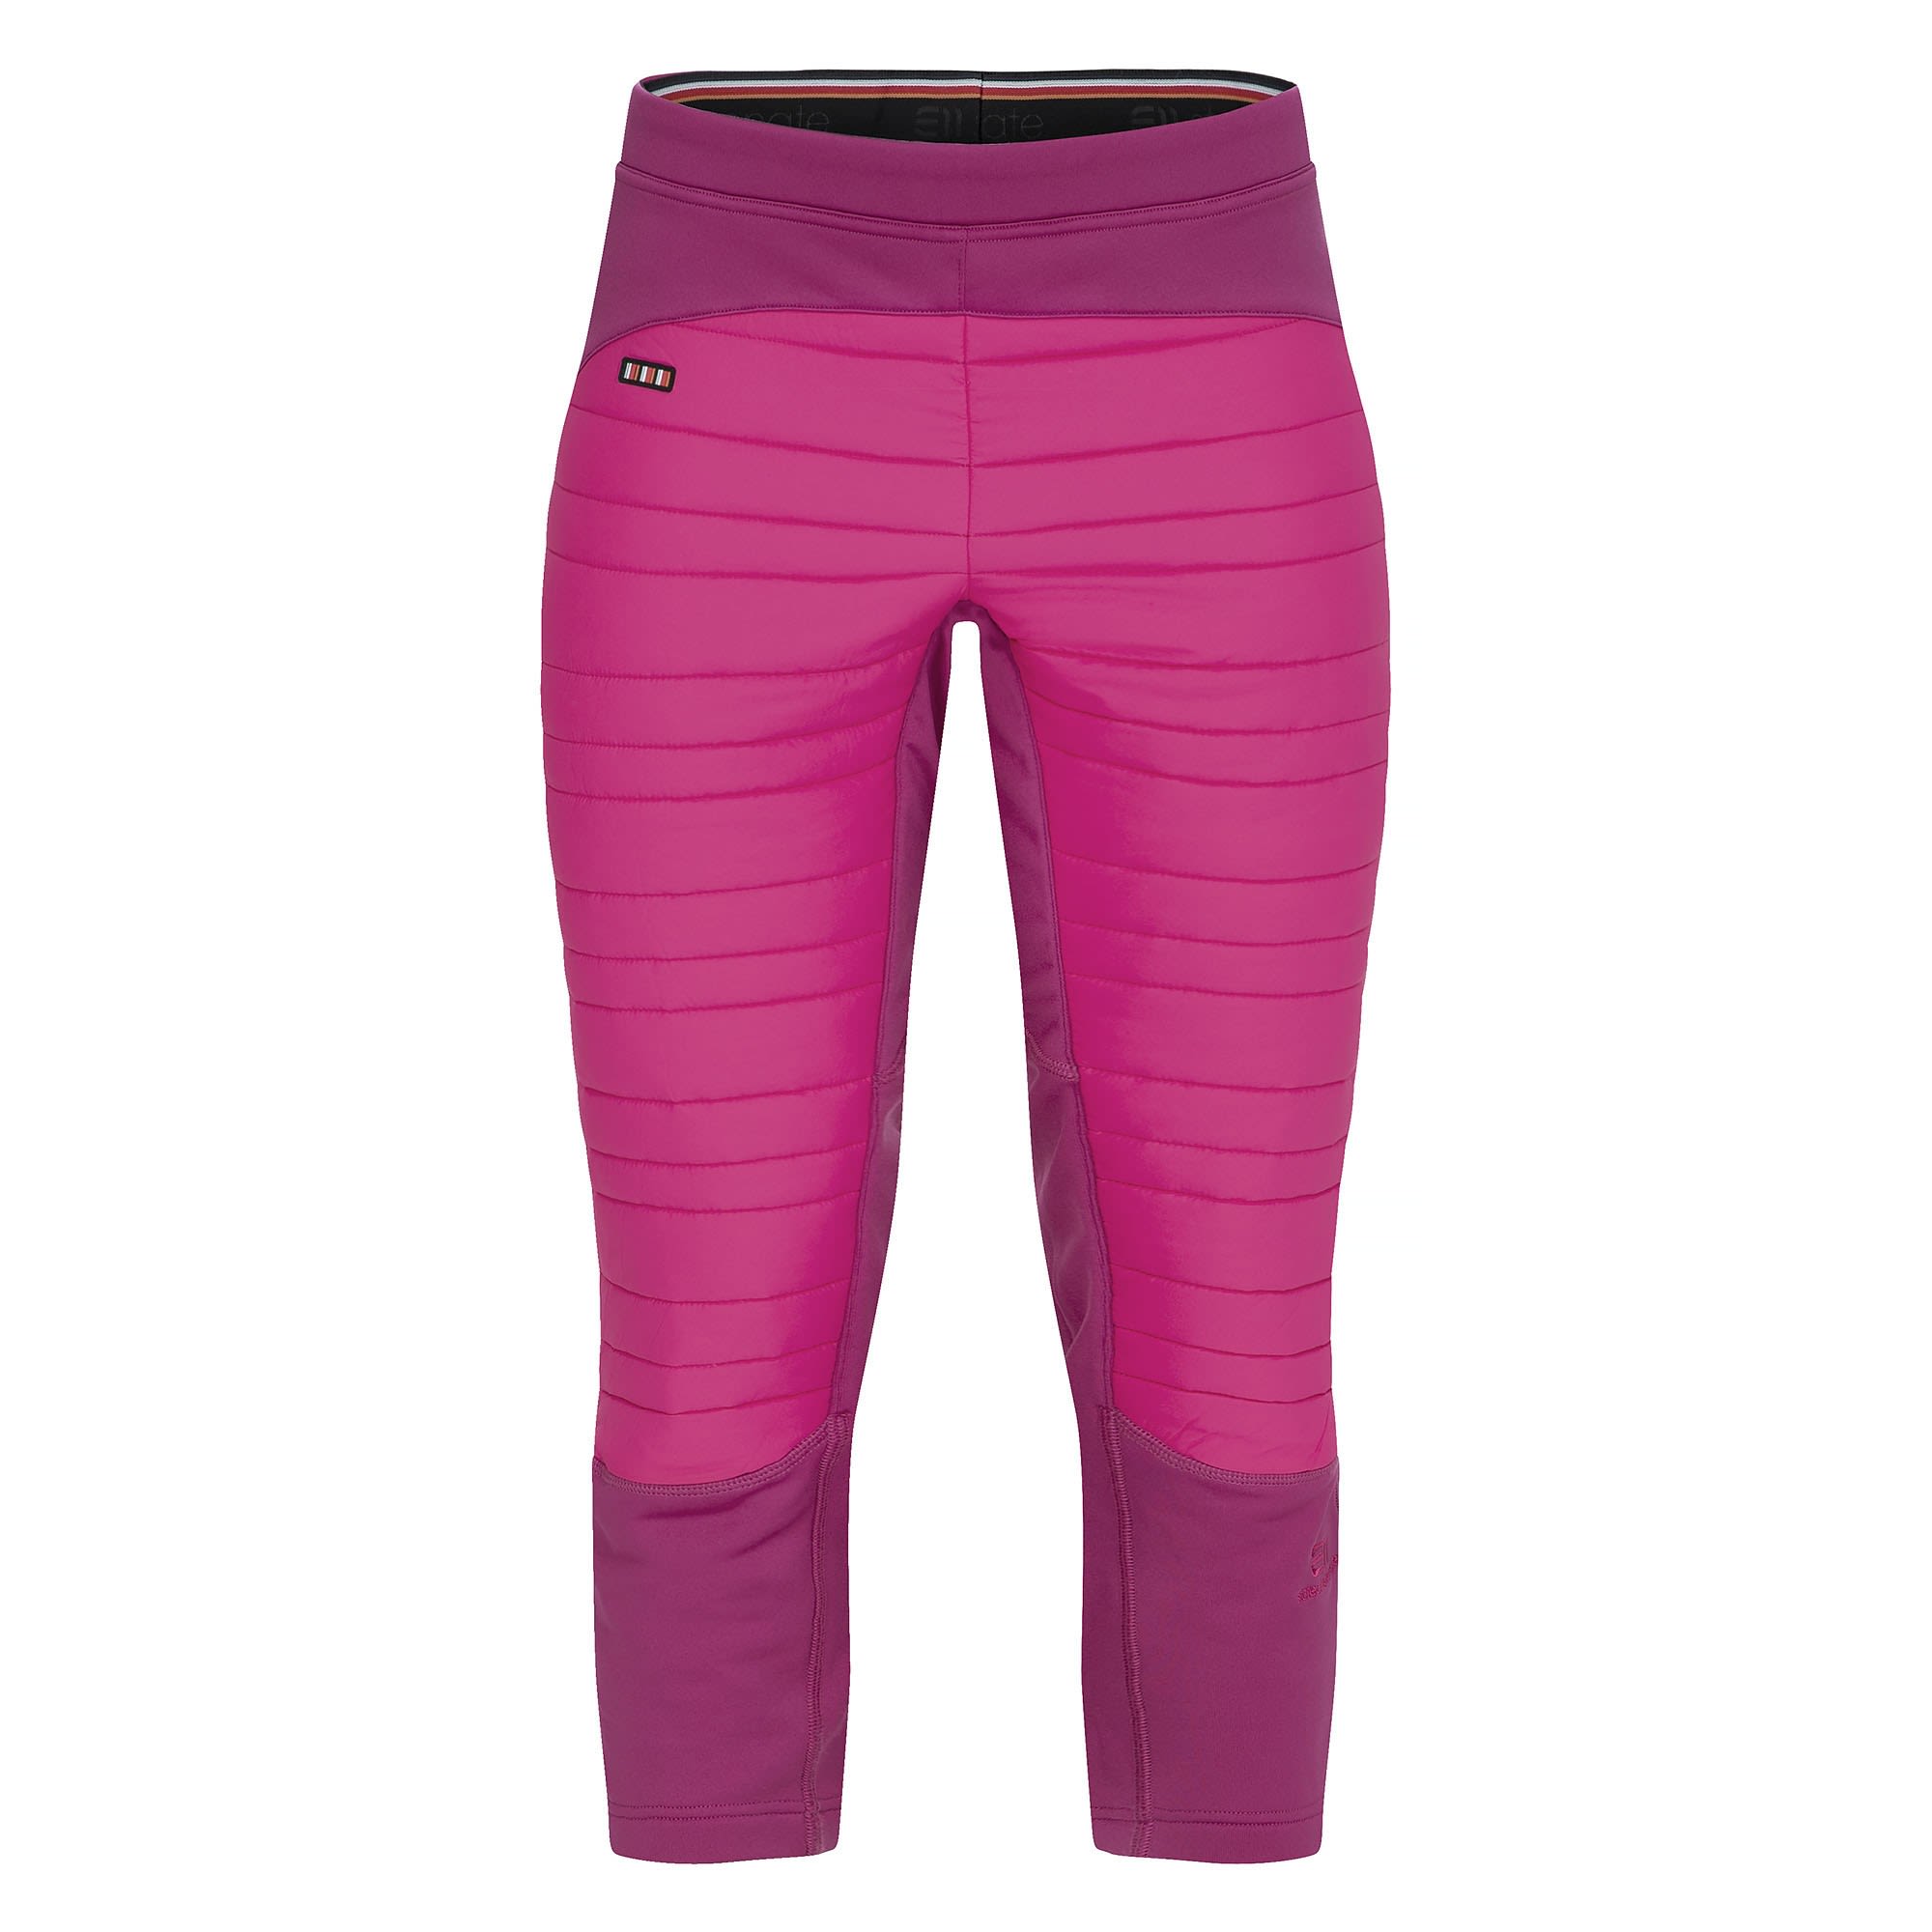 Elevenate Fusion Stretch Pants Pink- Female Hosen- Grsse S - Farbe Rich Pink